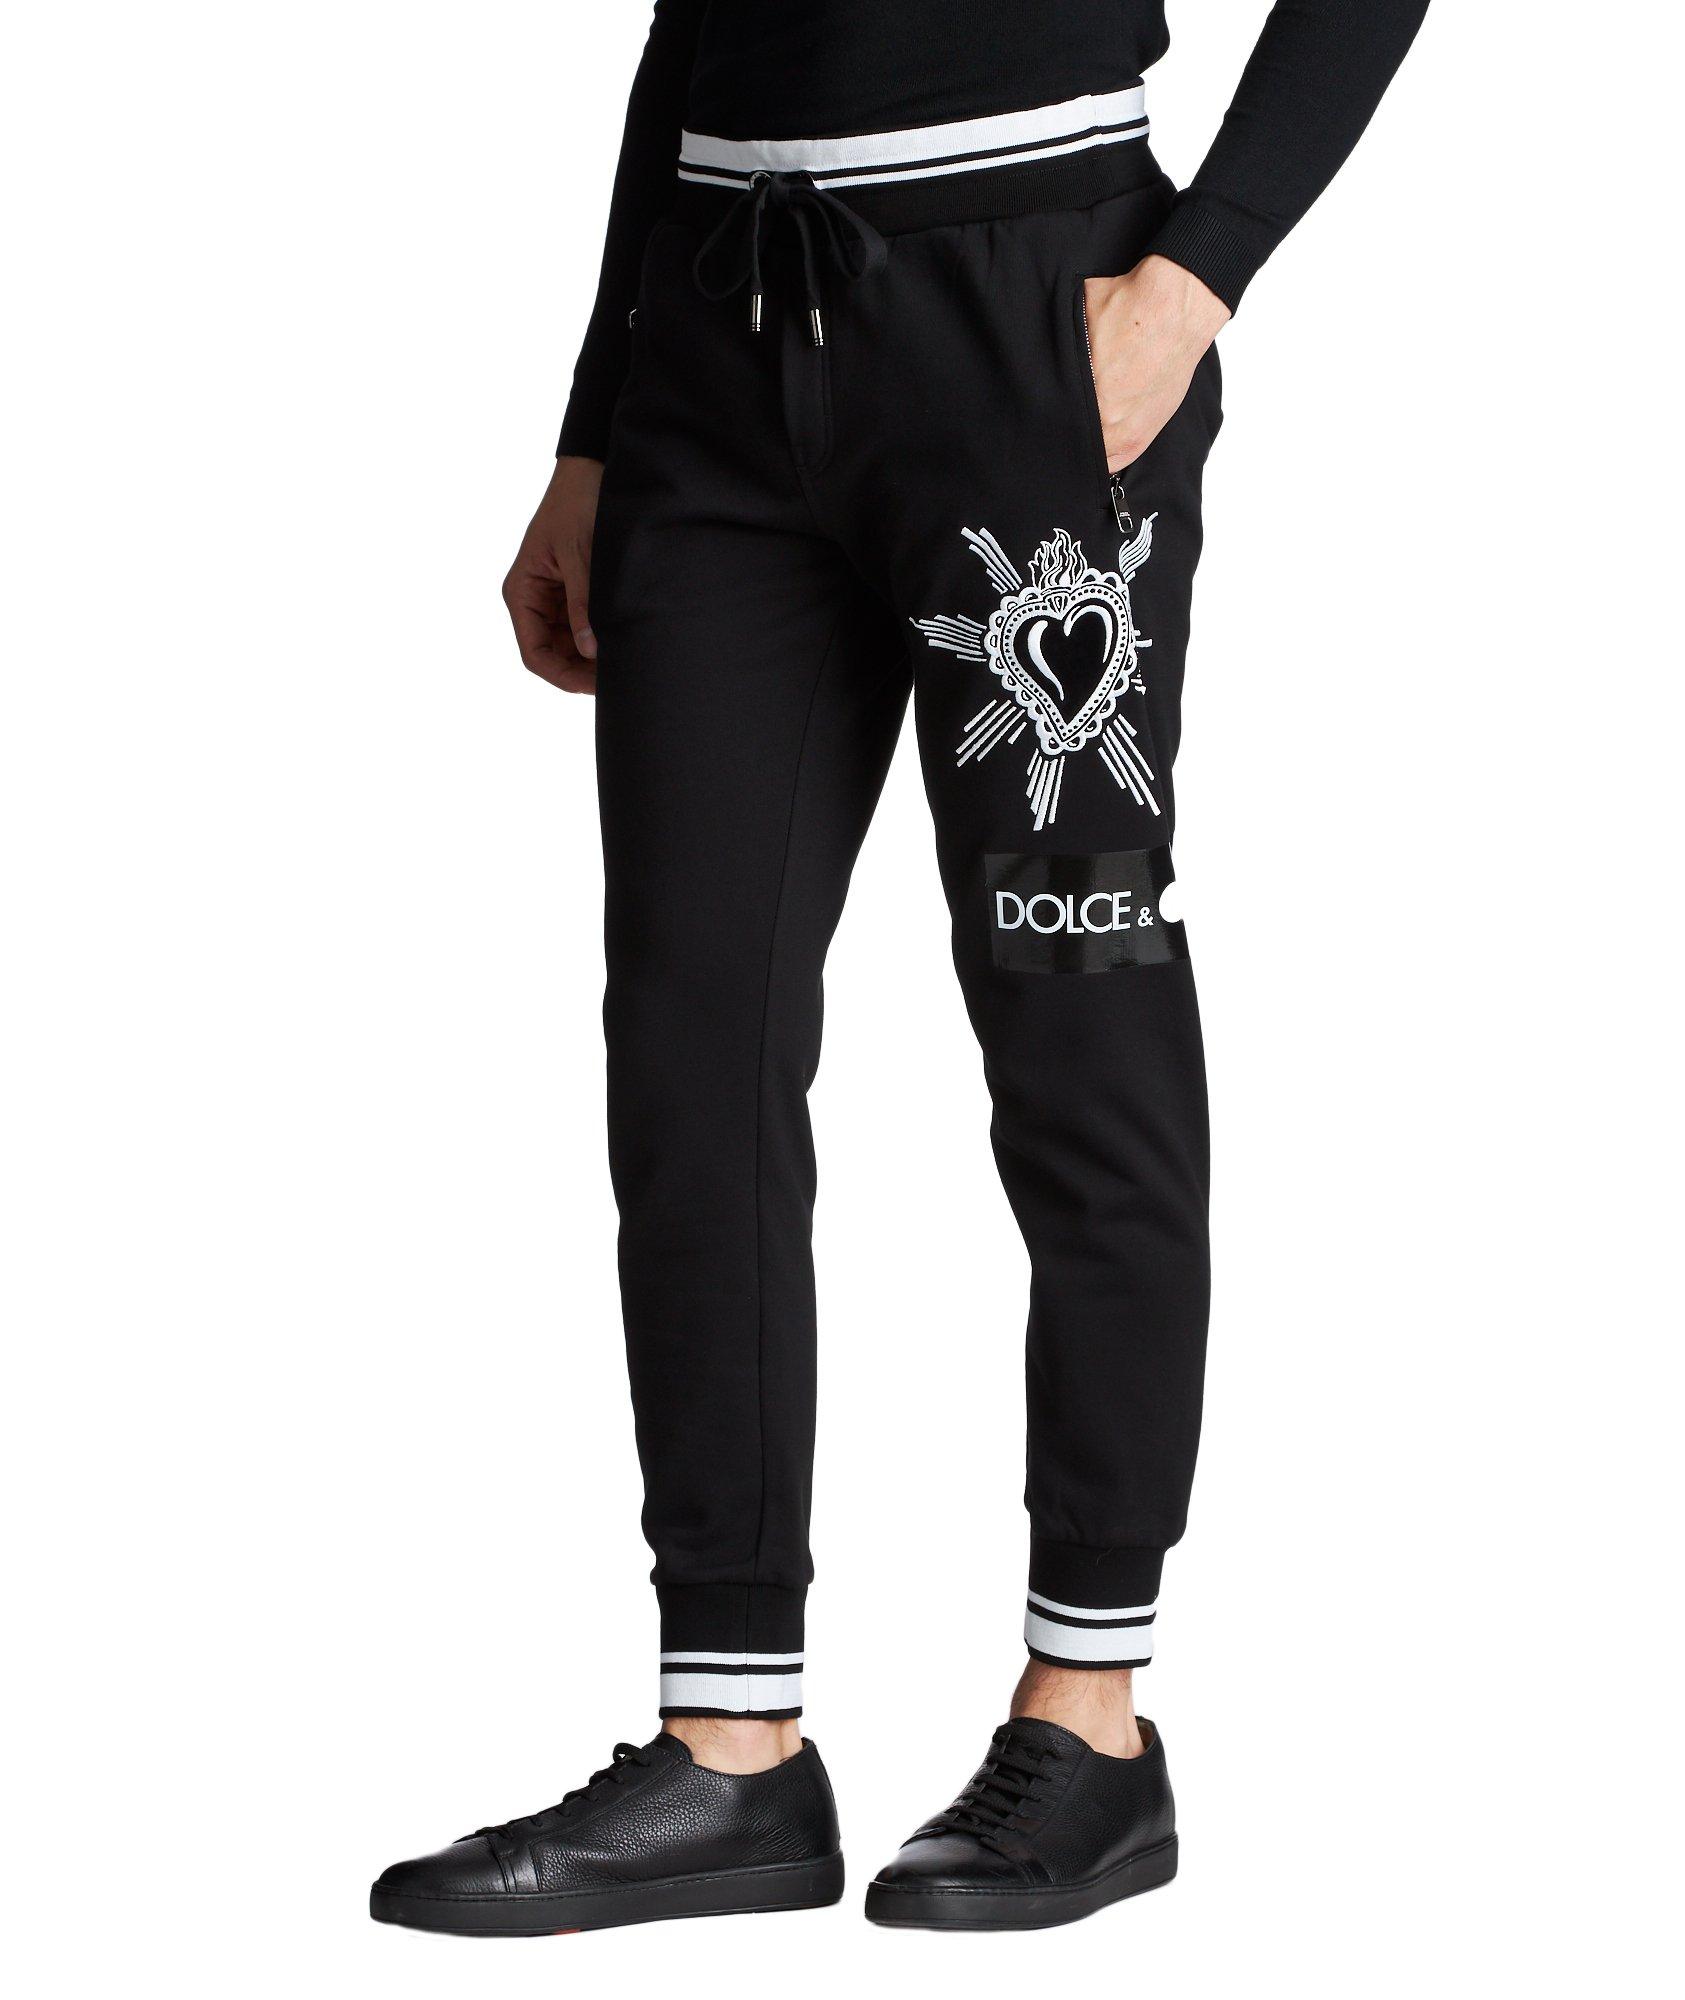 Embroidered Drawstring Joggers image 0